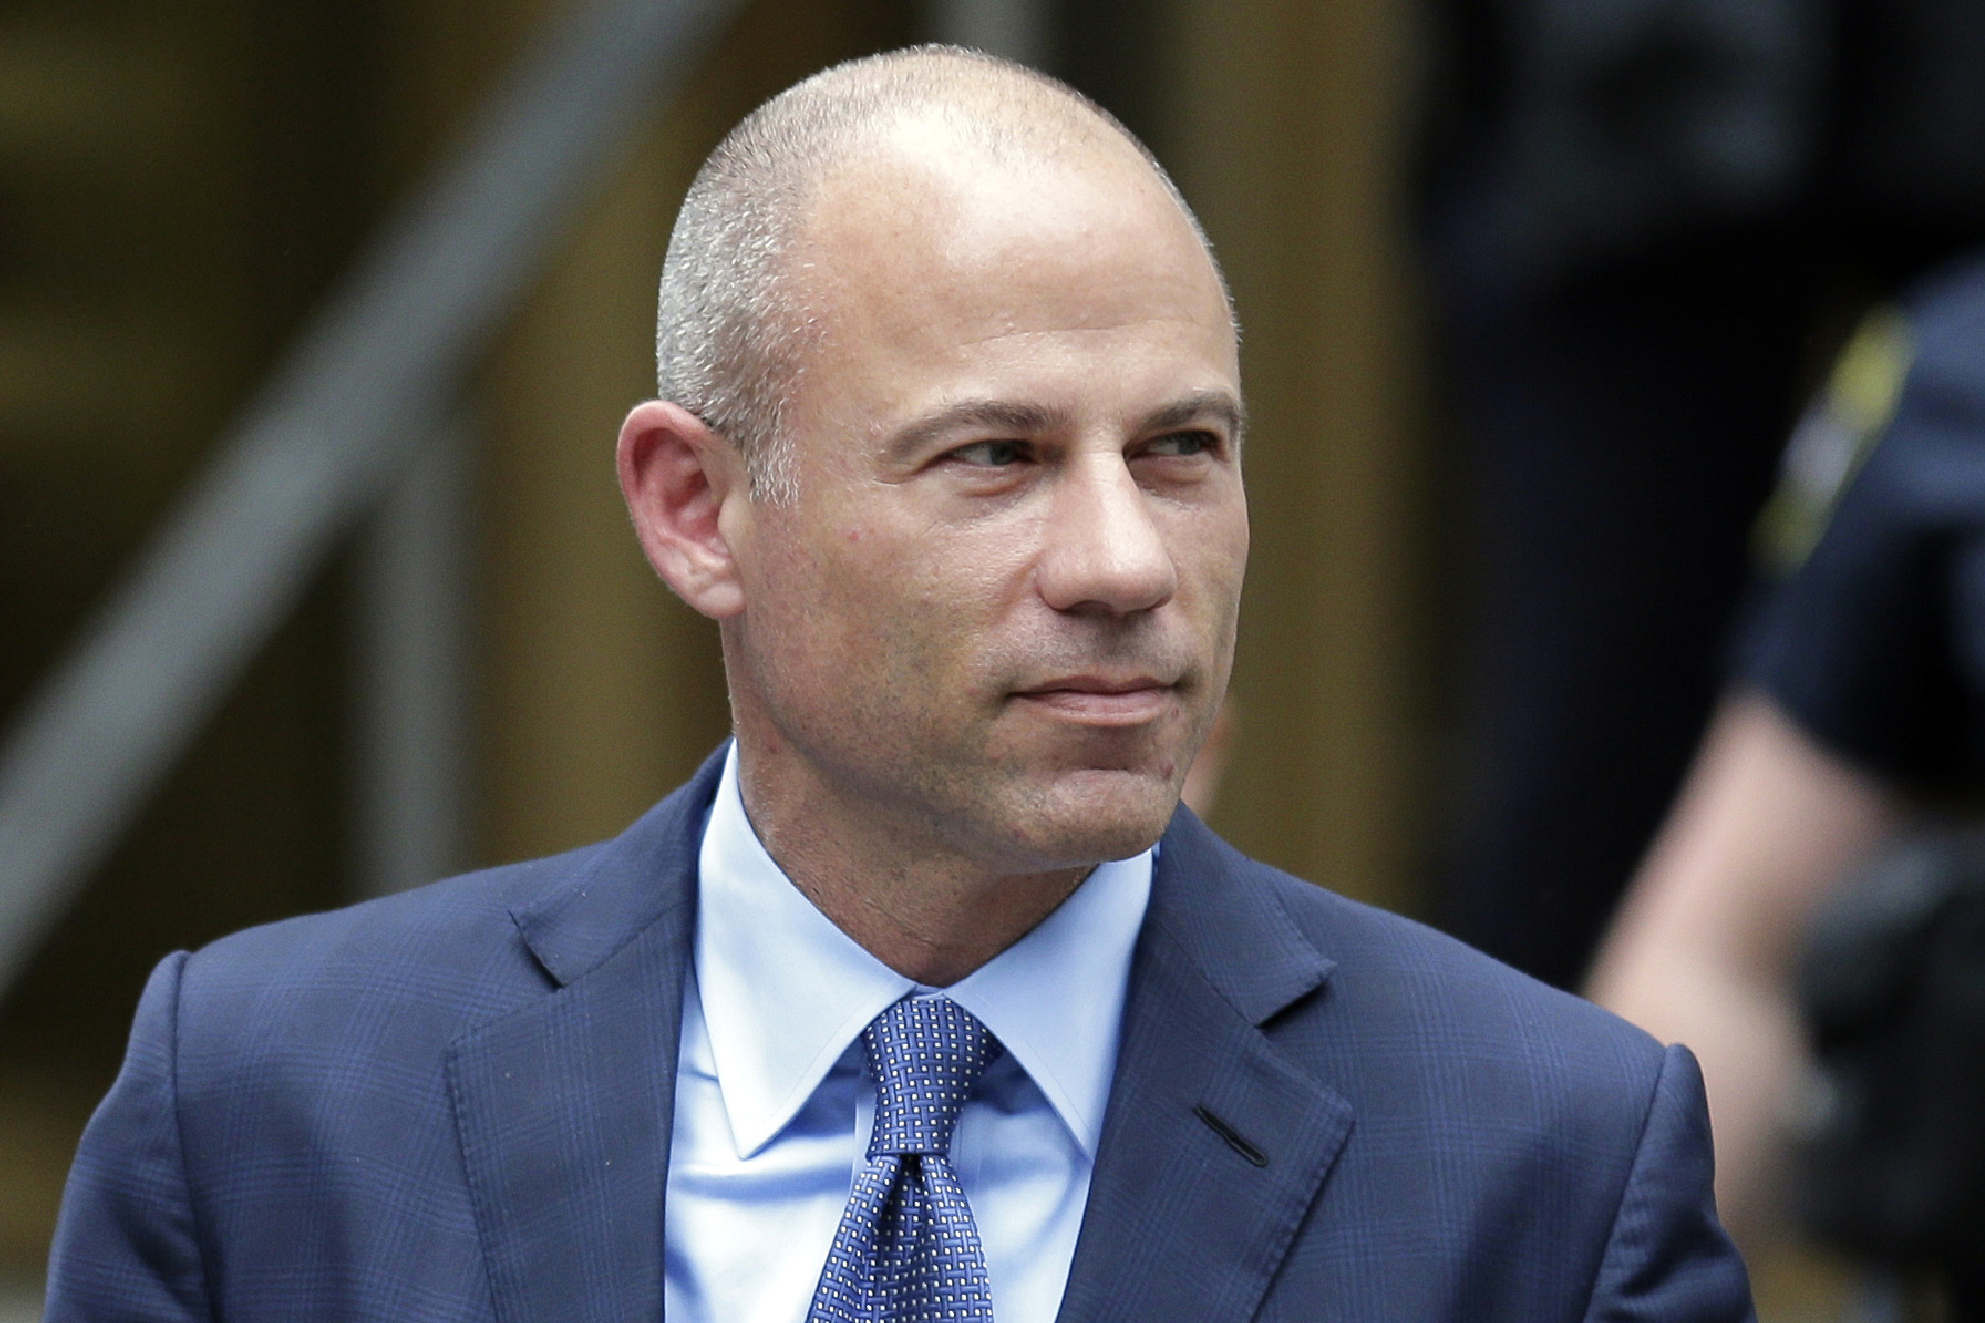 PHOTO: FILE - In this May 28, 2019, file photo, California attorney Michael Avenatti leaves a courthouse in New York following a hearing. 